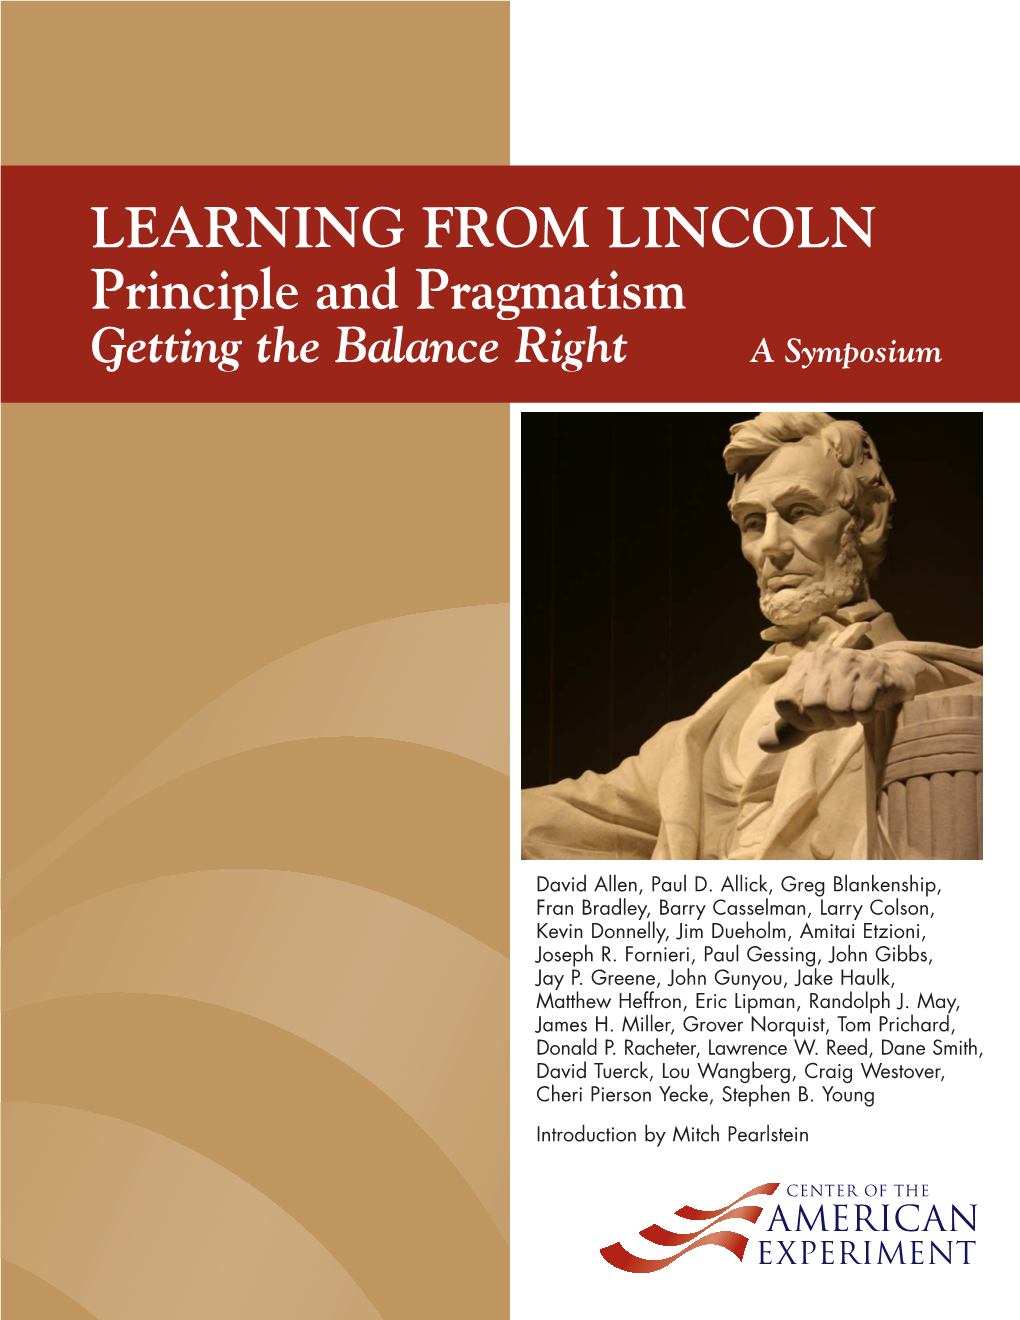 LEARNING from LINCOLN Principle and Pragmatism Getting the Balance Right a Symposium